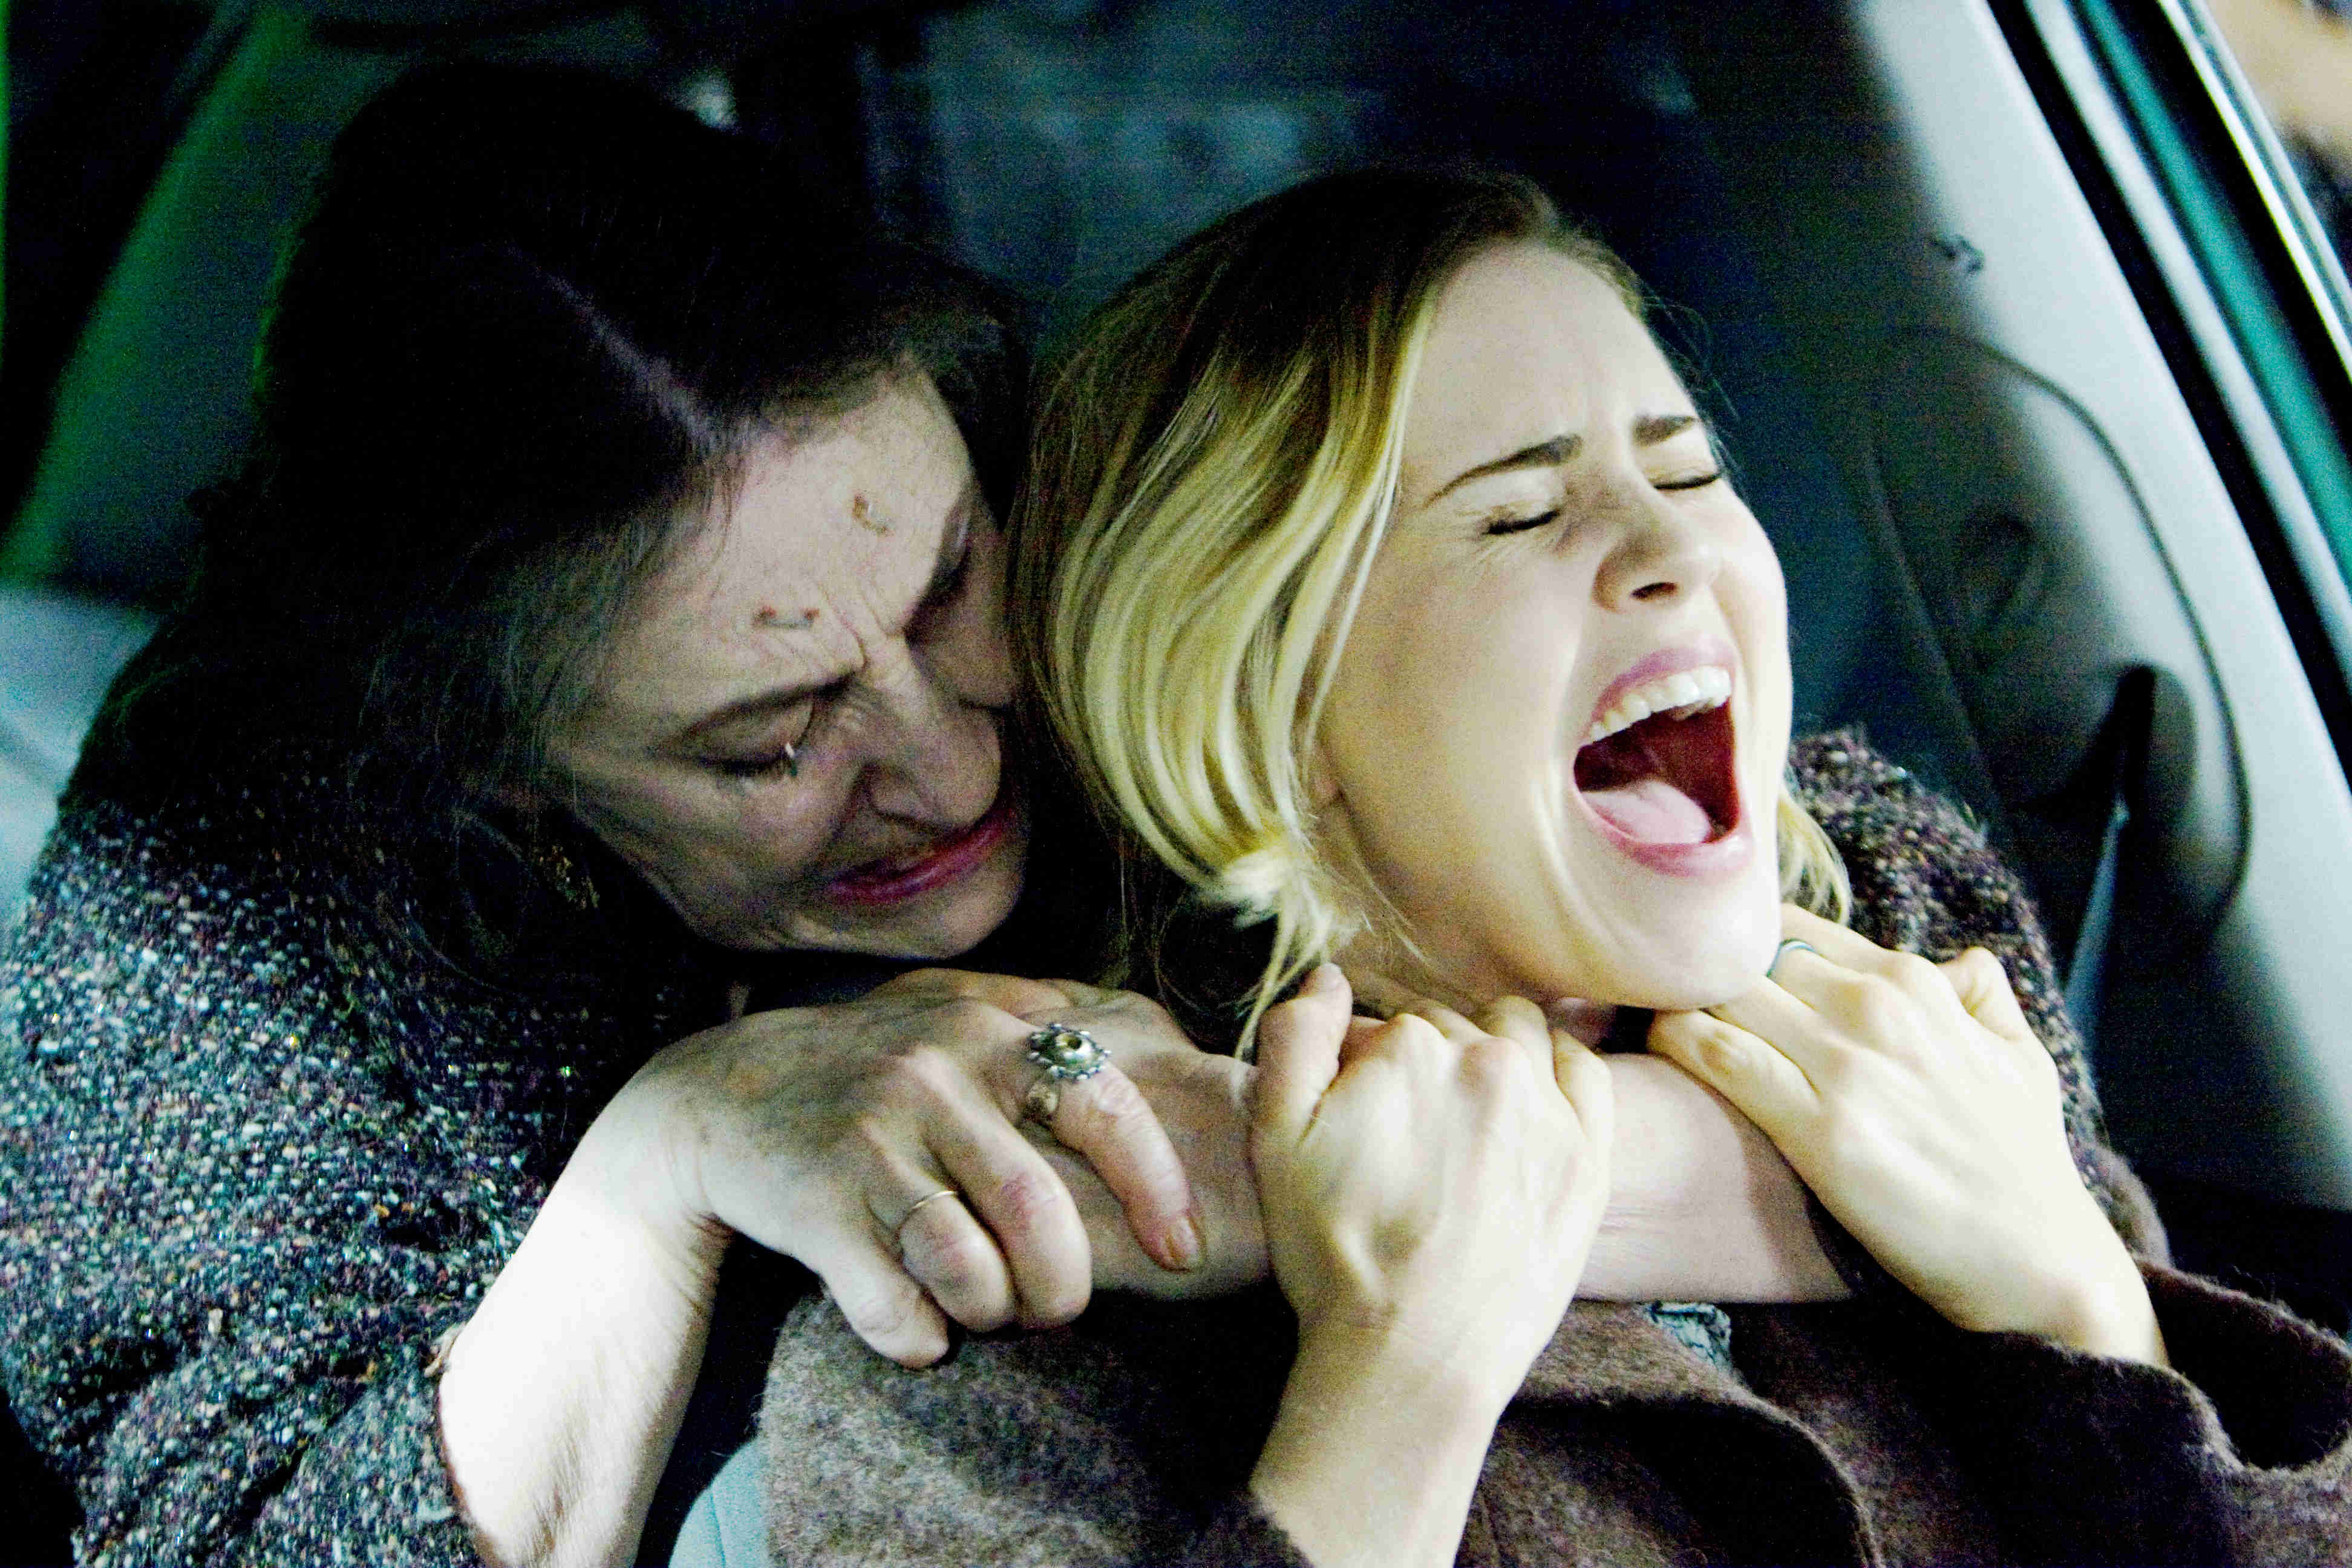 Lorna Raver attacks Alison Lohman in Drag Me to Hell (2009)